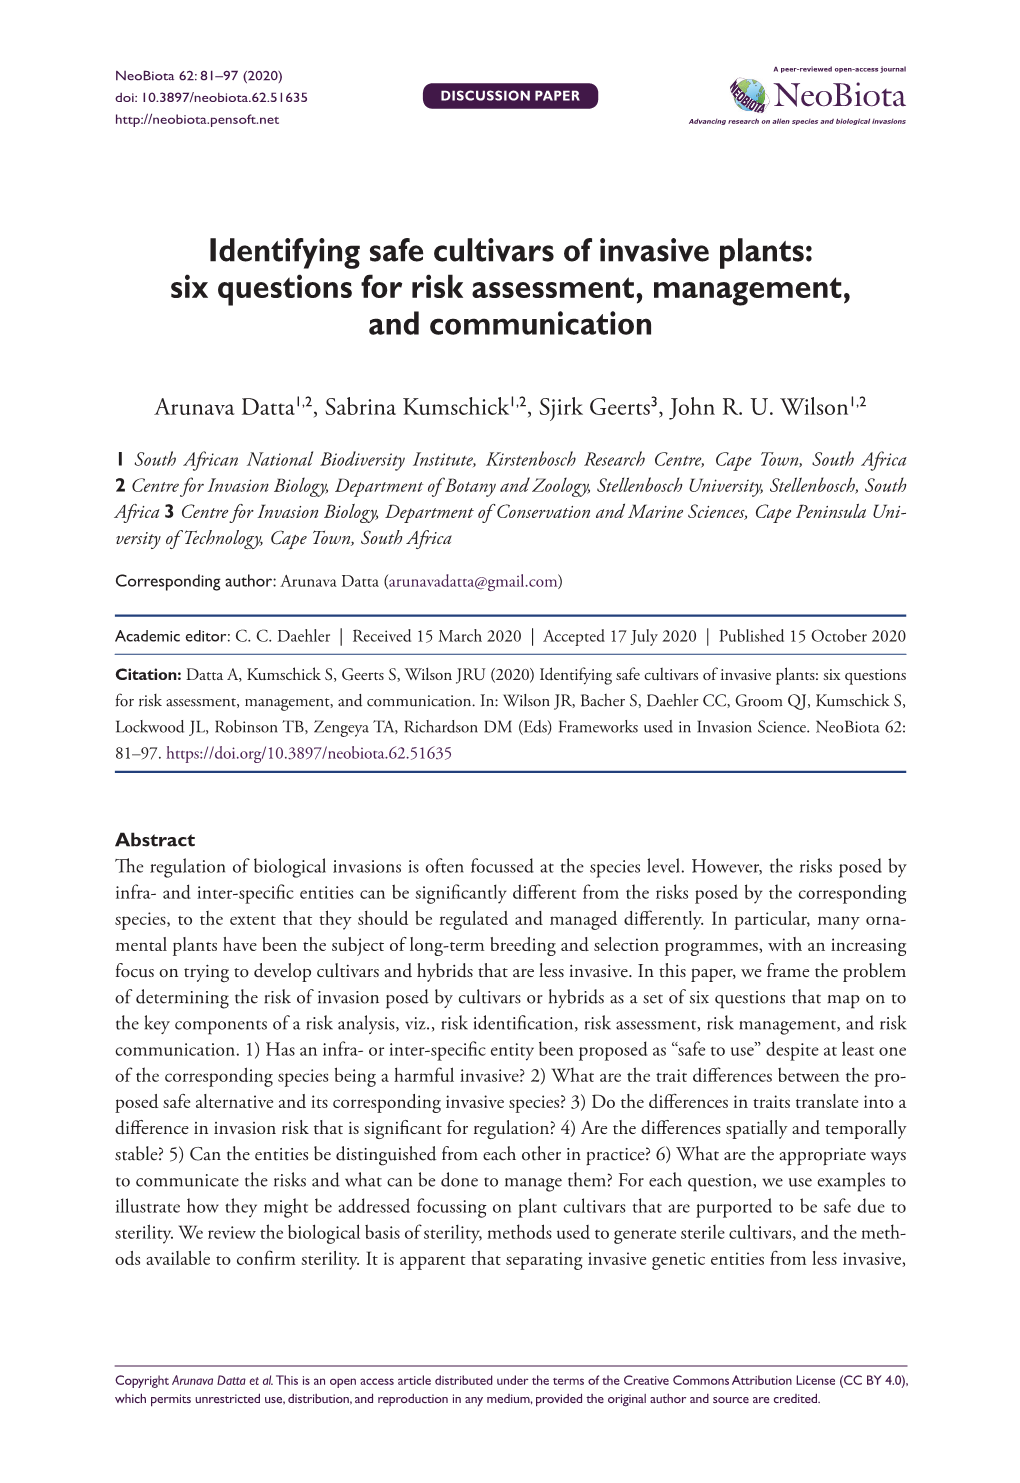 Identifying Safe Cultivars of Invasive Plants: Six Questions for Risk Assessment, Management, and Communication